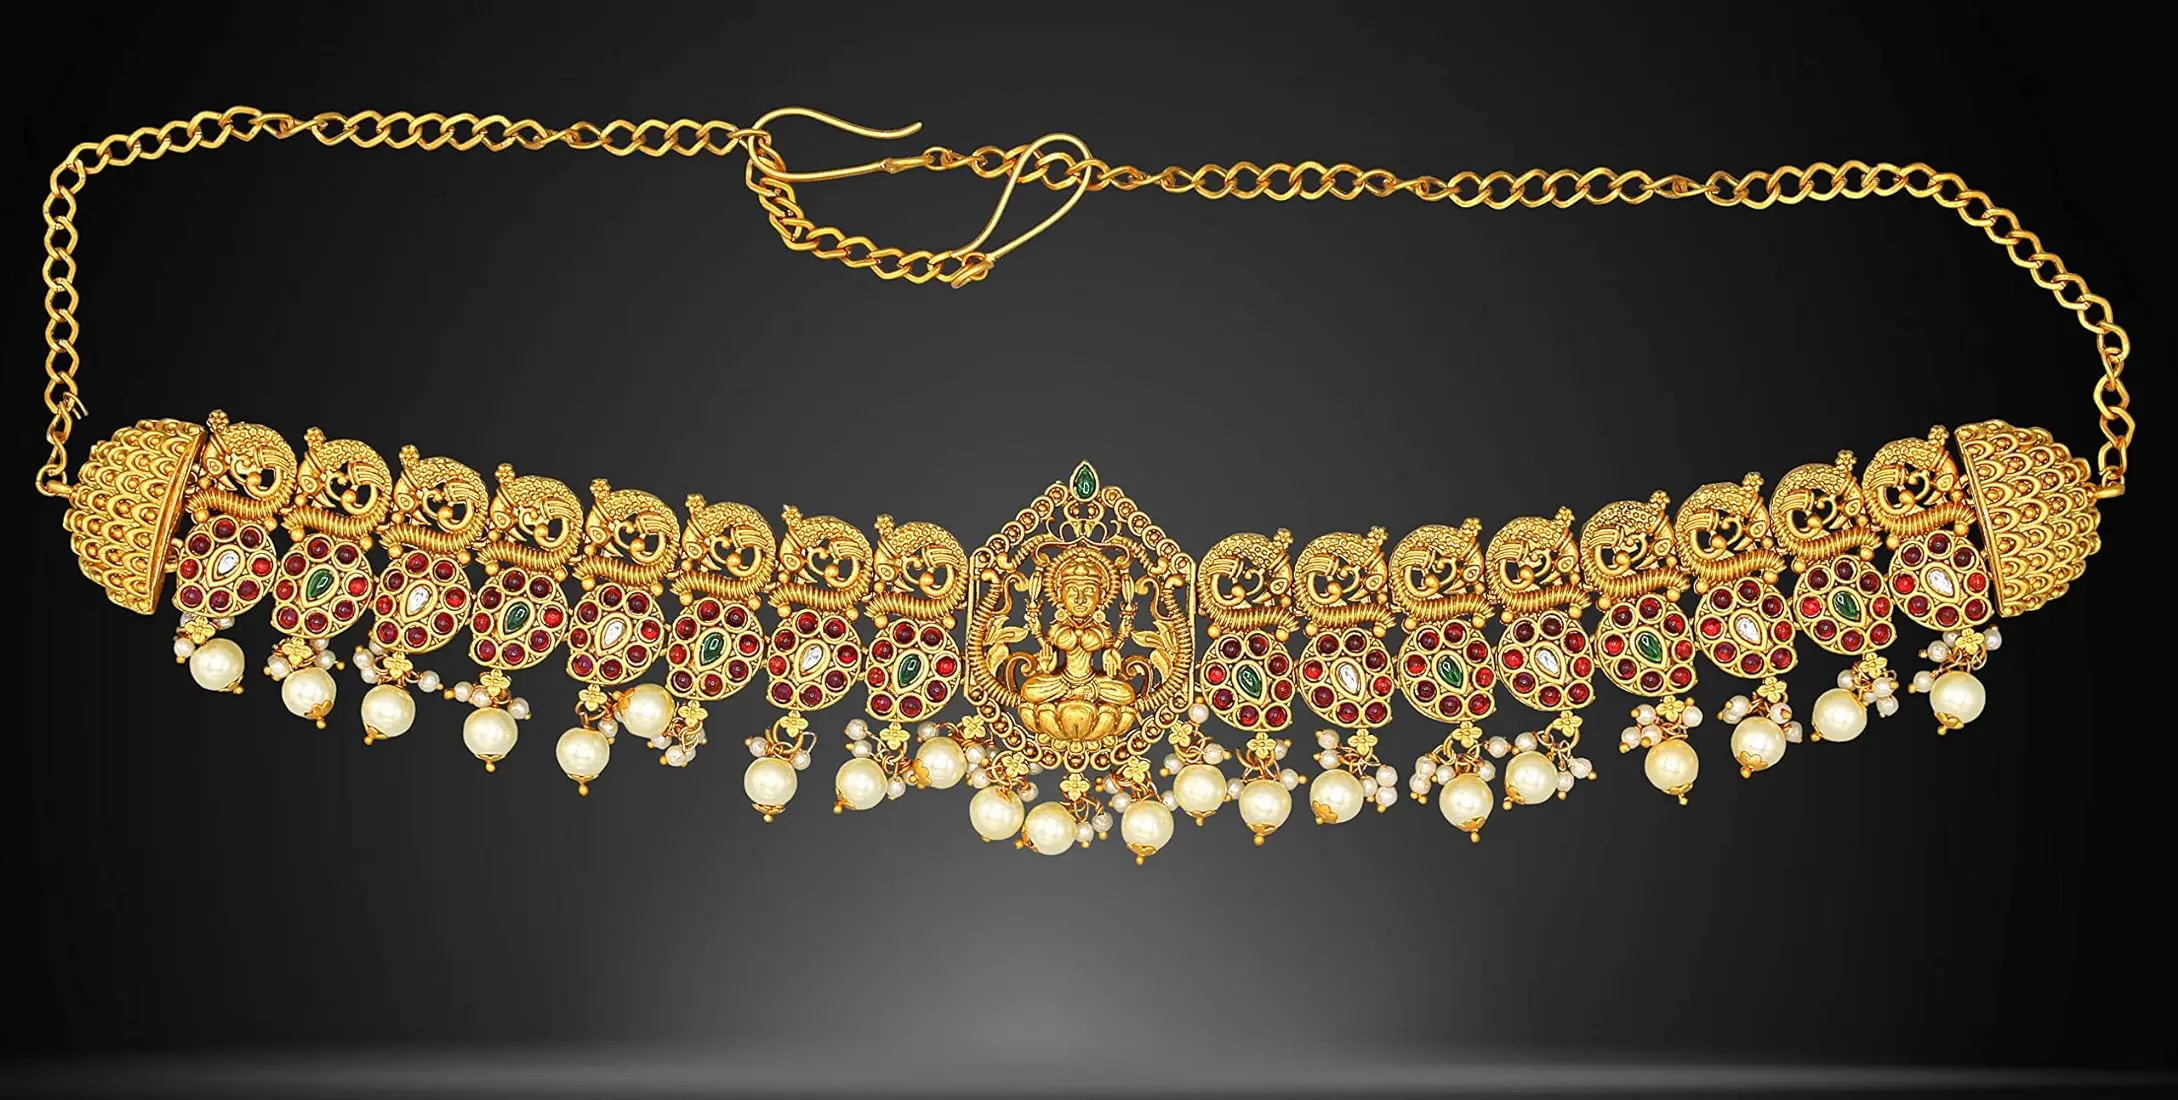 Temple Jewellery Divine Adornment Steeped in Tradition (6) temple jewellery - Temple Jewellery Divine Adornment Steeped in Tradition 6 - Temple Jewellery: Divine Adornment Steeped in Tradition